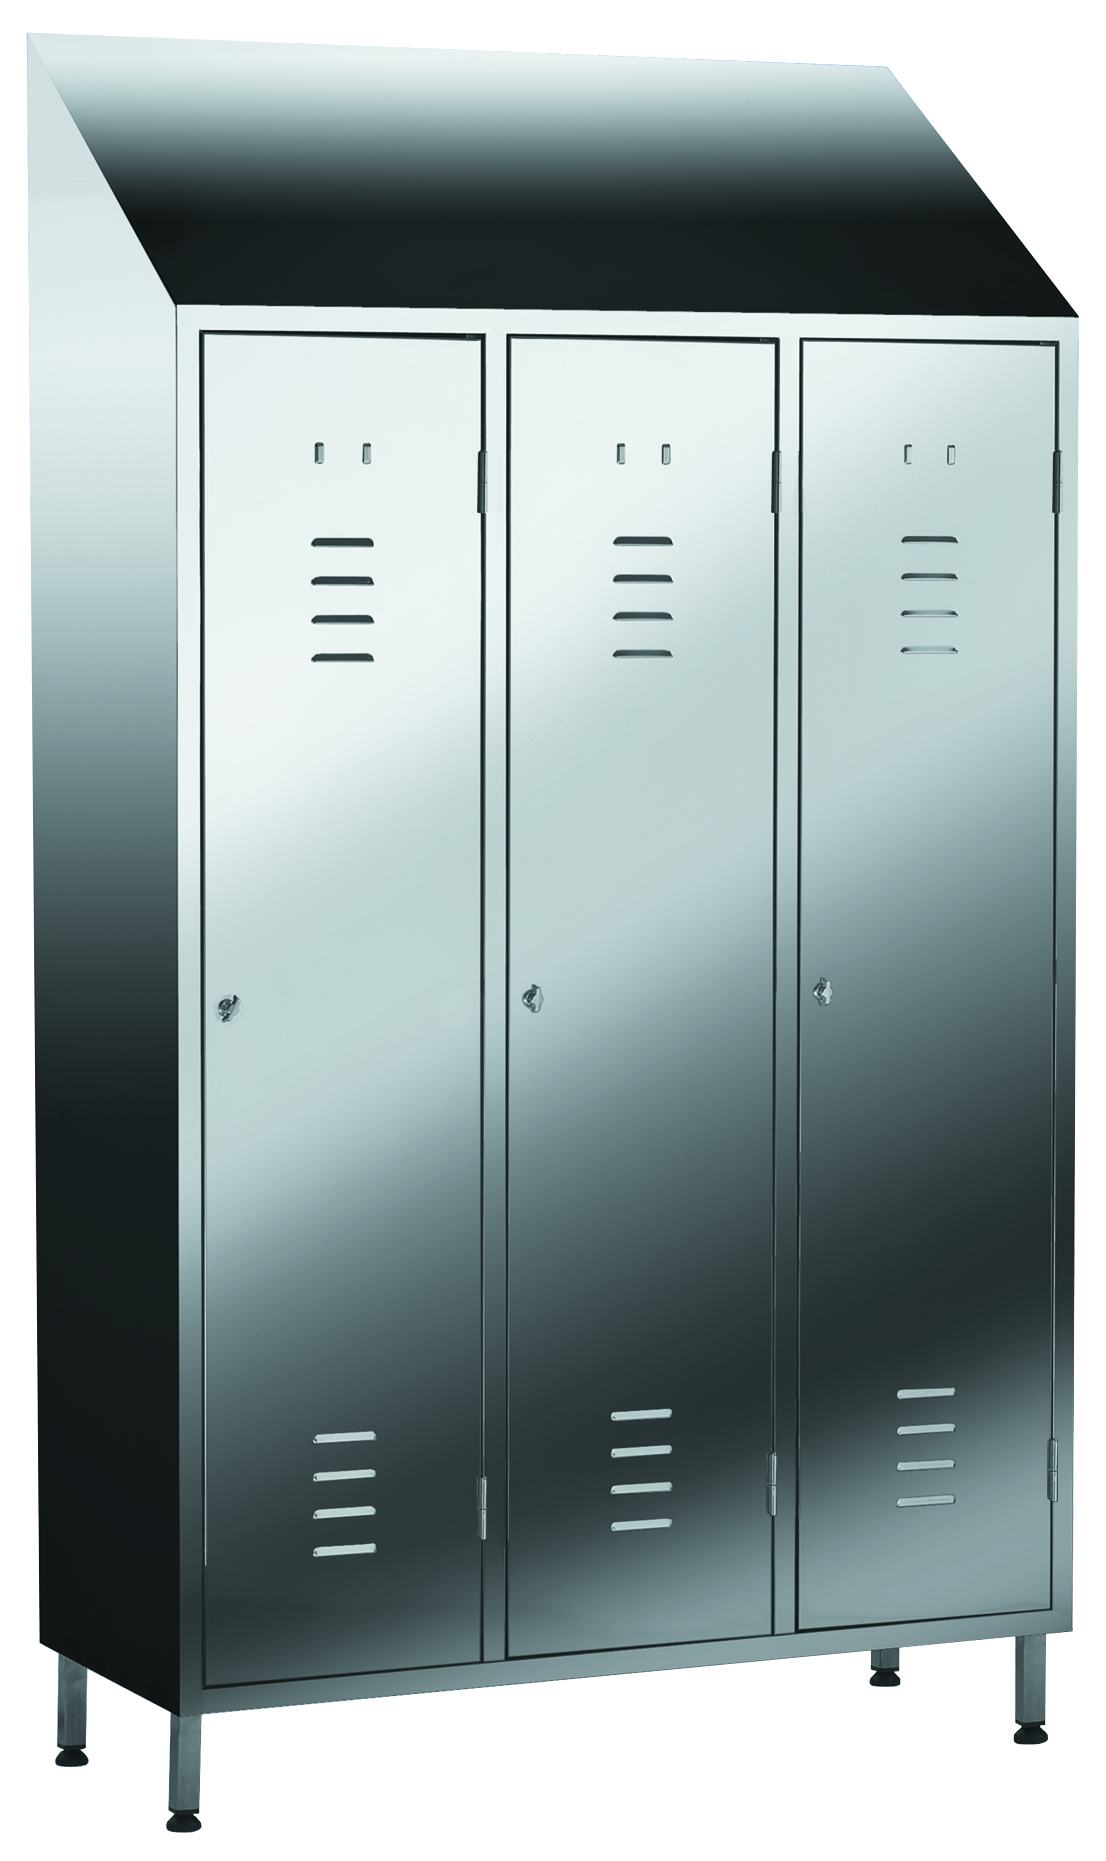 Stainless Steel Lockers by J&K Stainless Solutions Ltd